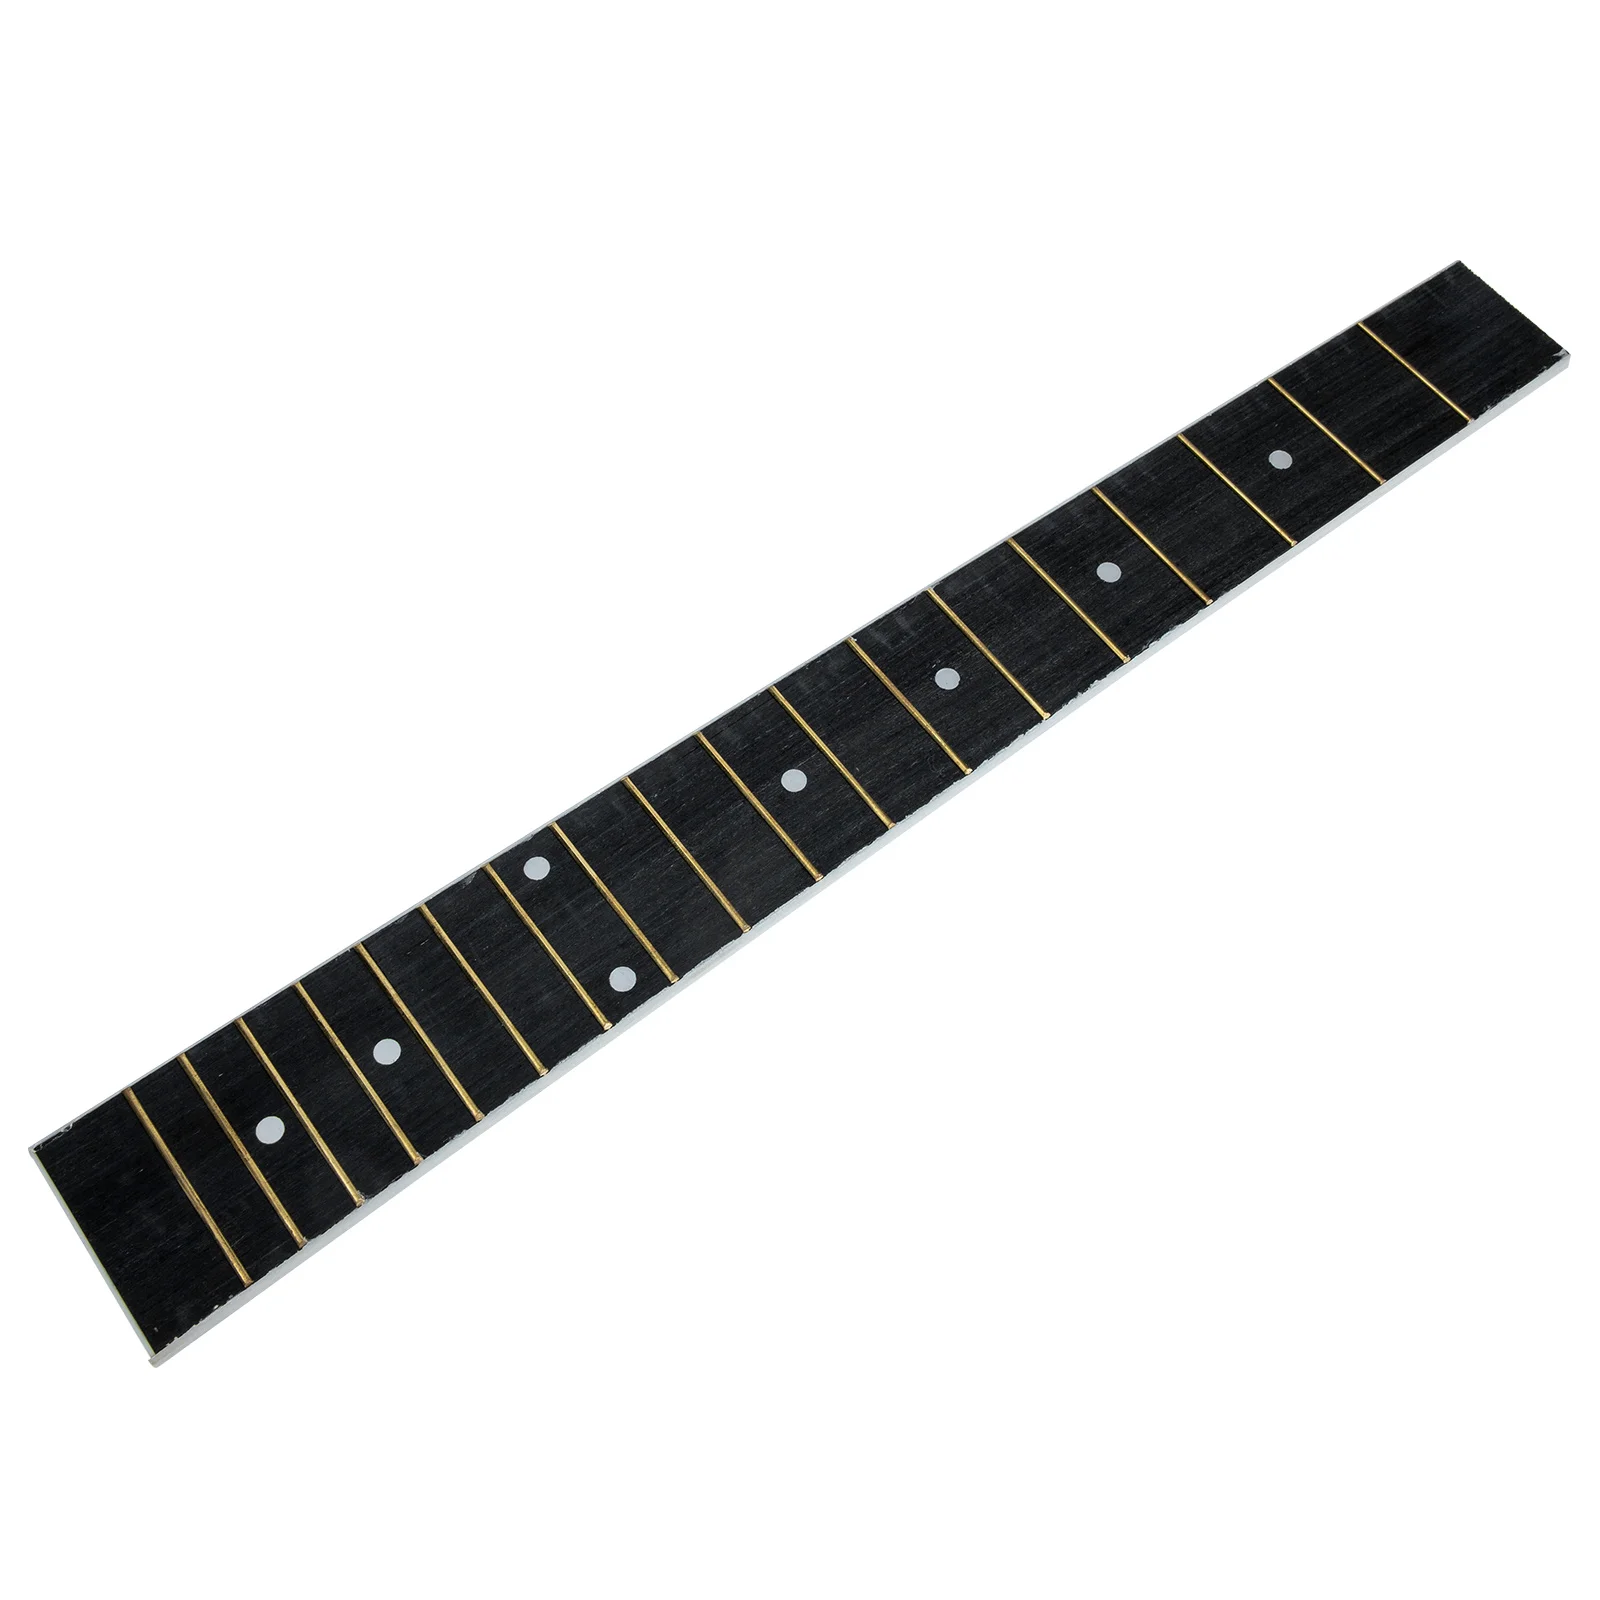 

Guitar Wood Fingerboard Ukulele Fretboards Supply Bass Guitars Electric Neck Acoustic Creative Plate Technical Wooden